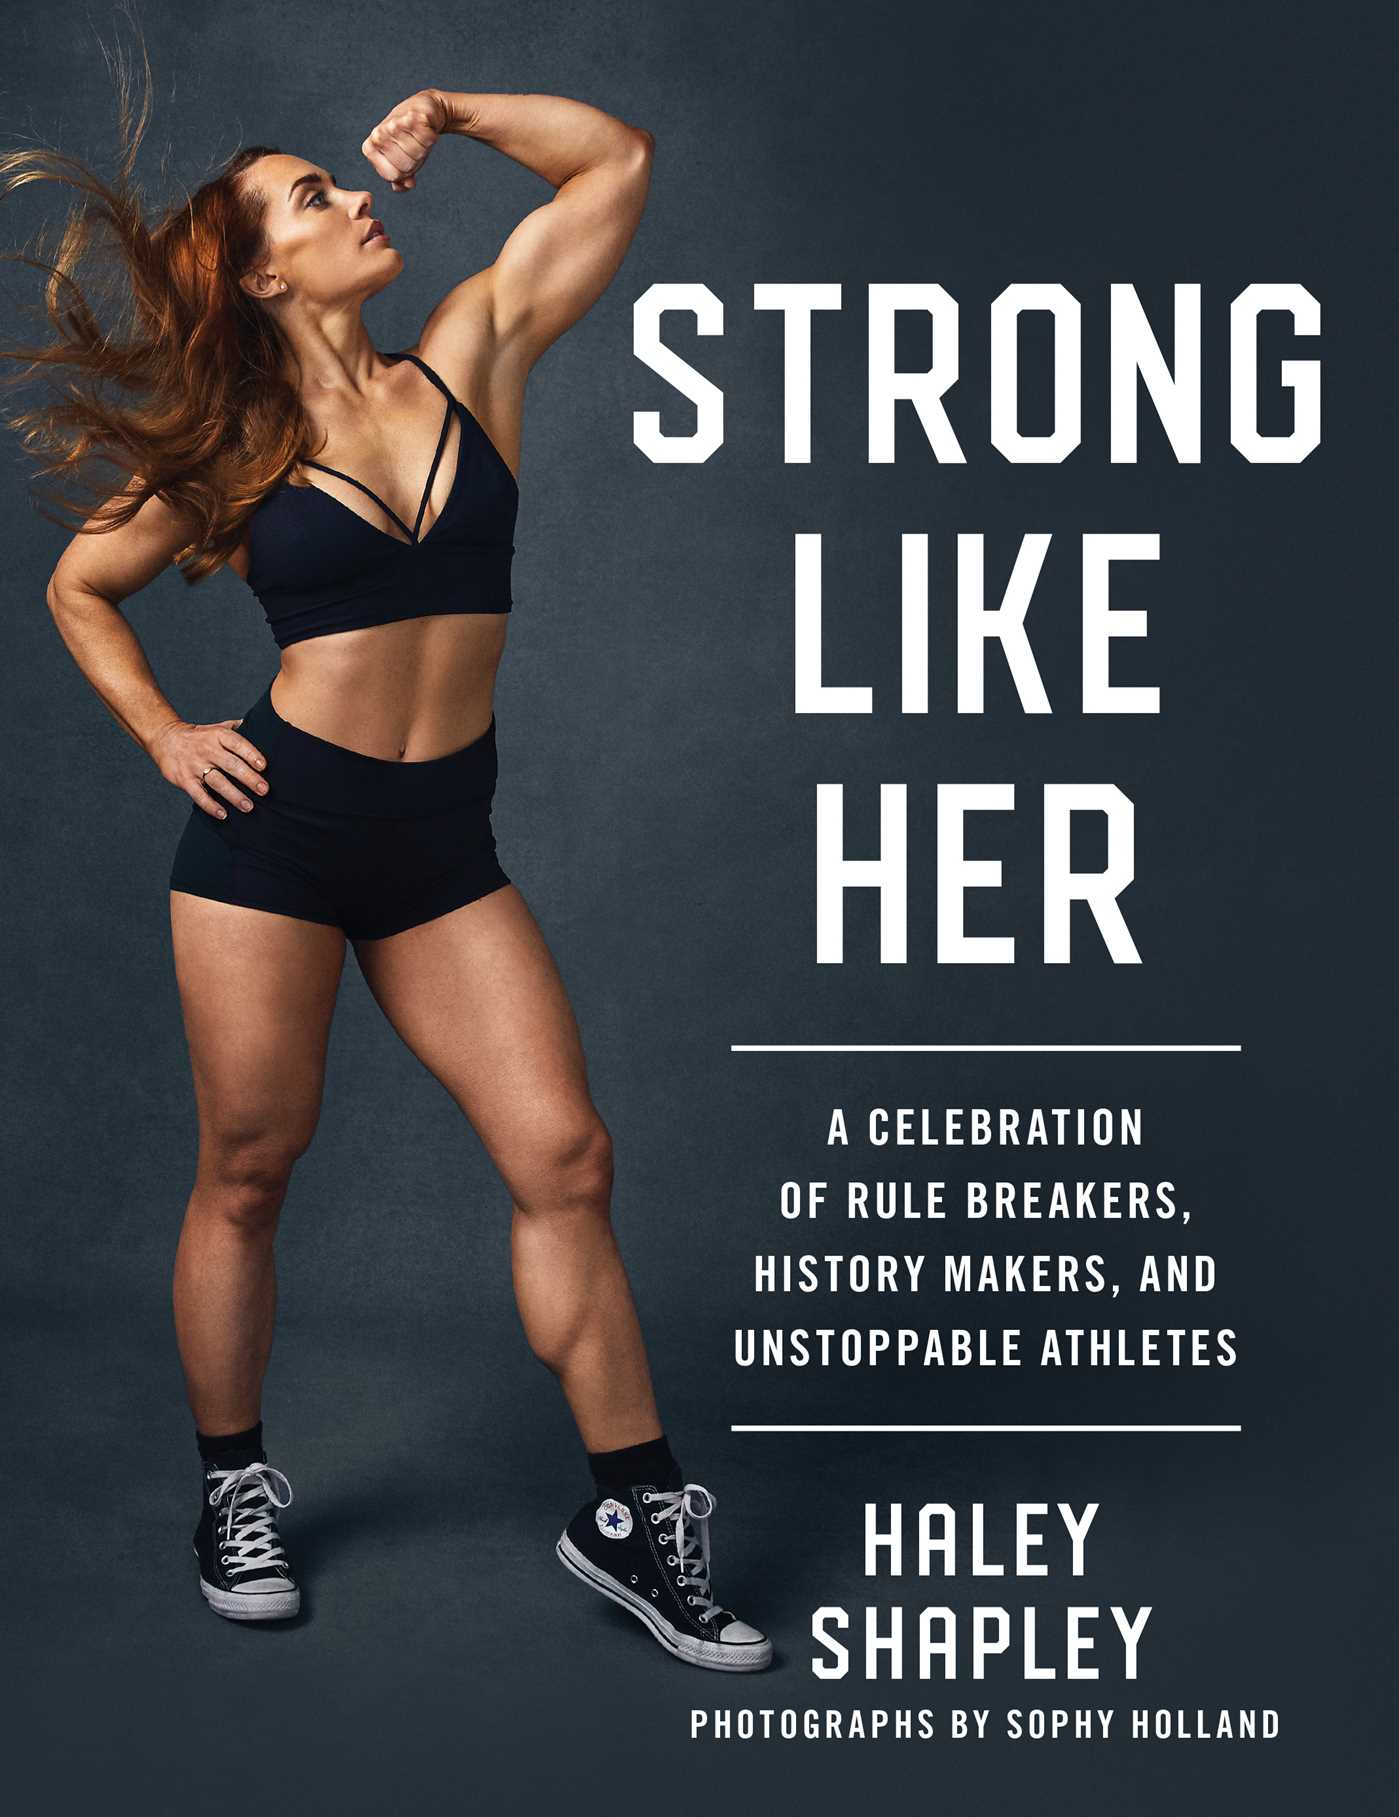 Book Launch: Strong Like Her by Haley Shapley in conversation with Jaimie Monahan, Holly Rilinger and more!  (CANCELED)